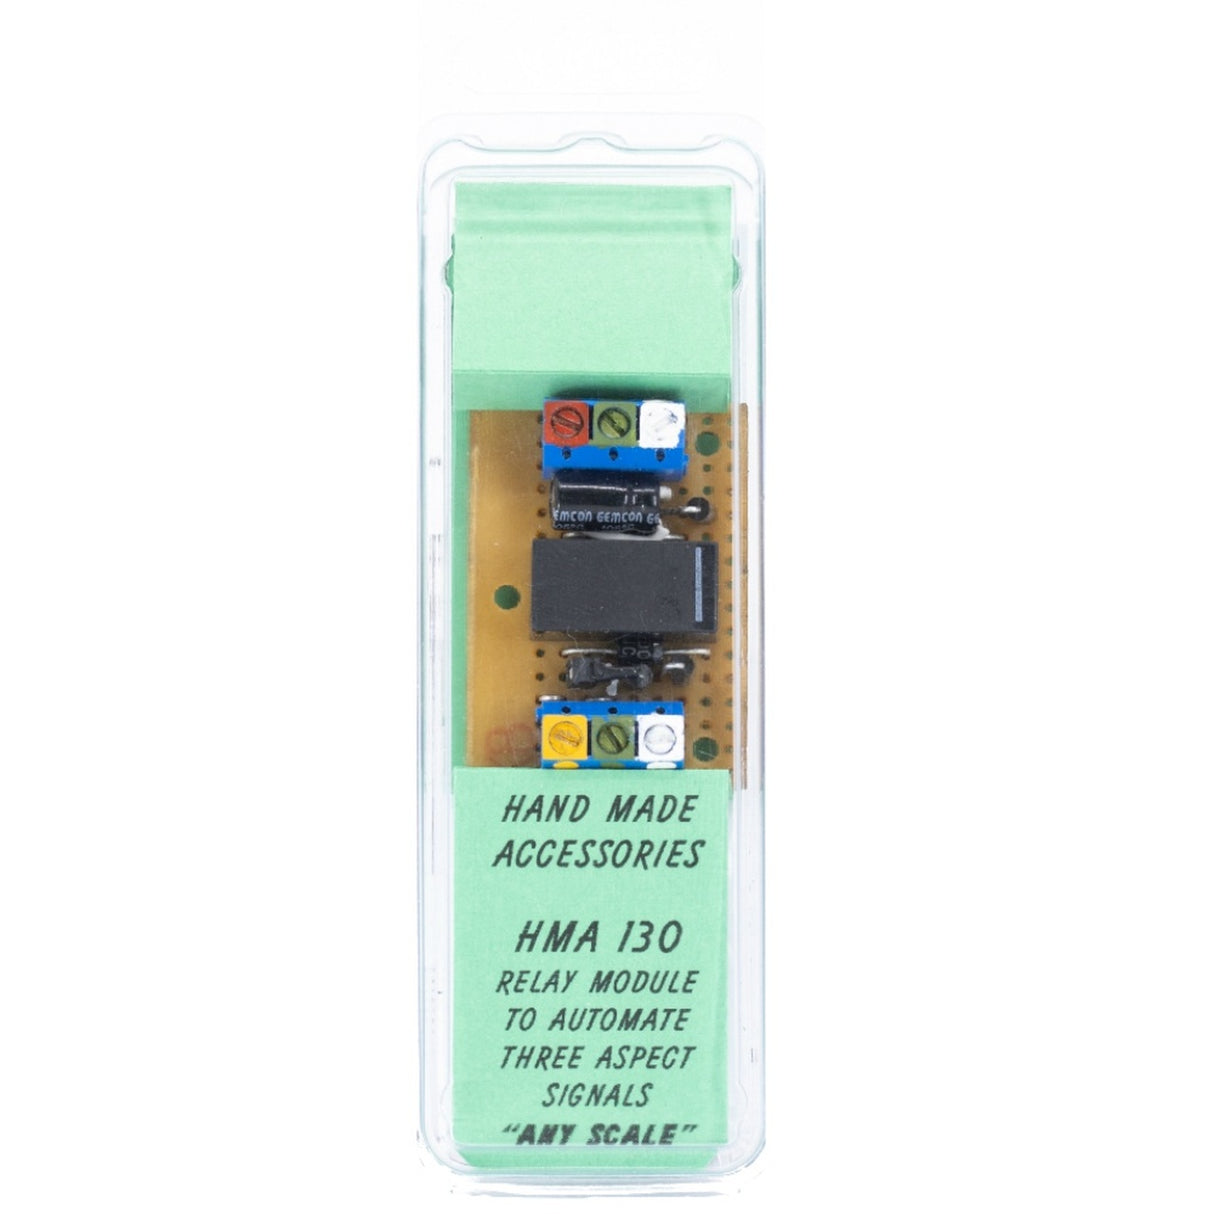 HMA 130 Relay Module to Automate Three Aspect Signals Hand Made Accessories TRAINS - HO/OO SCALE